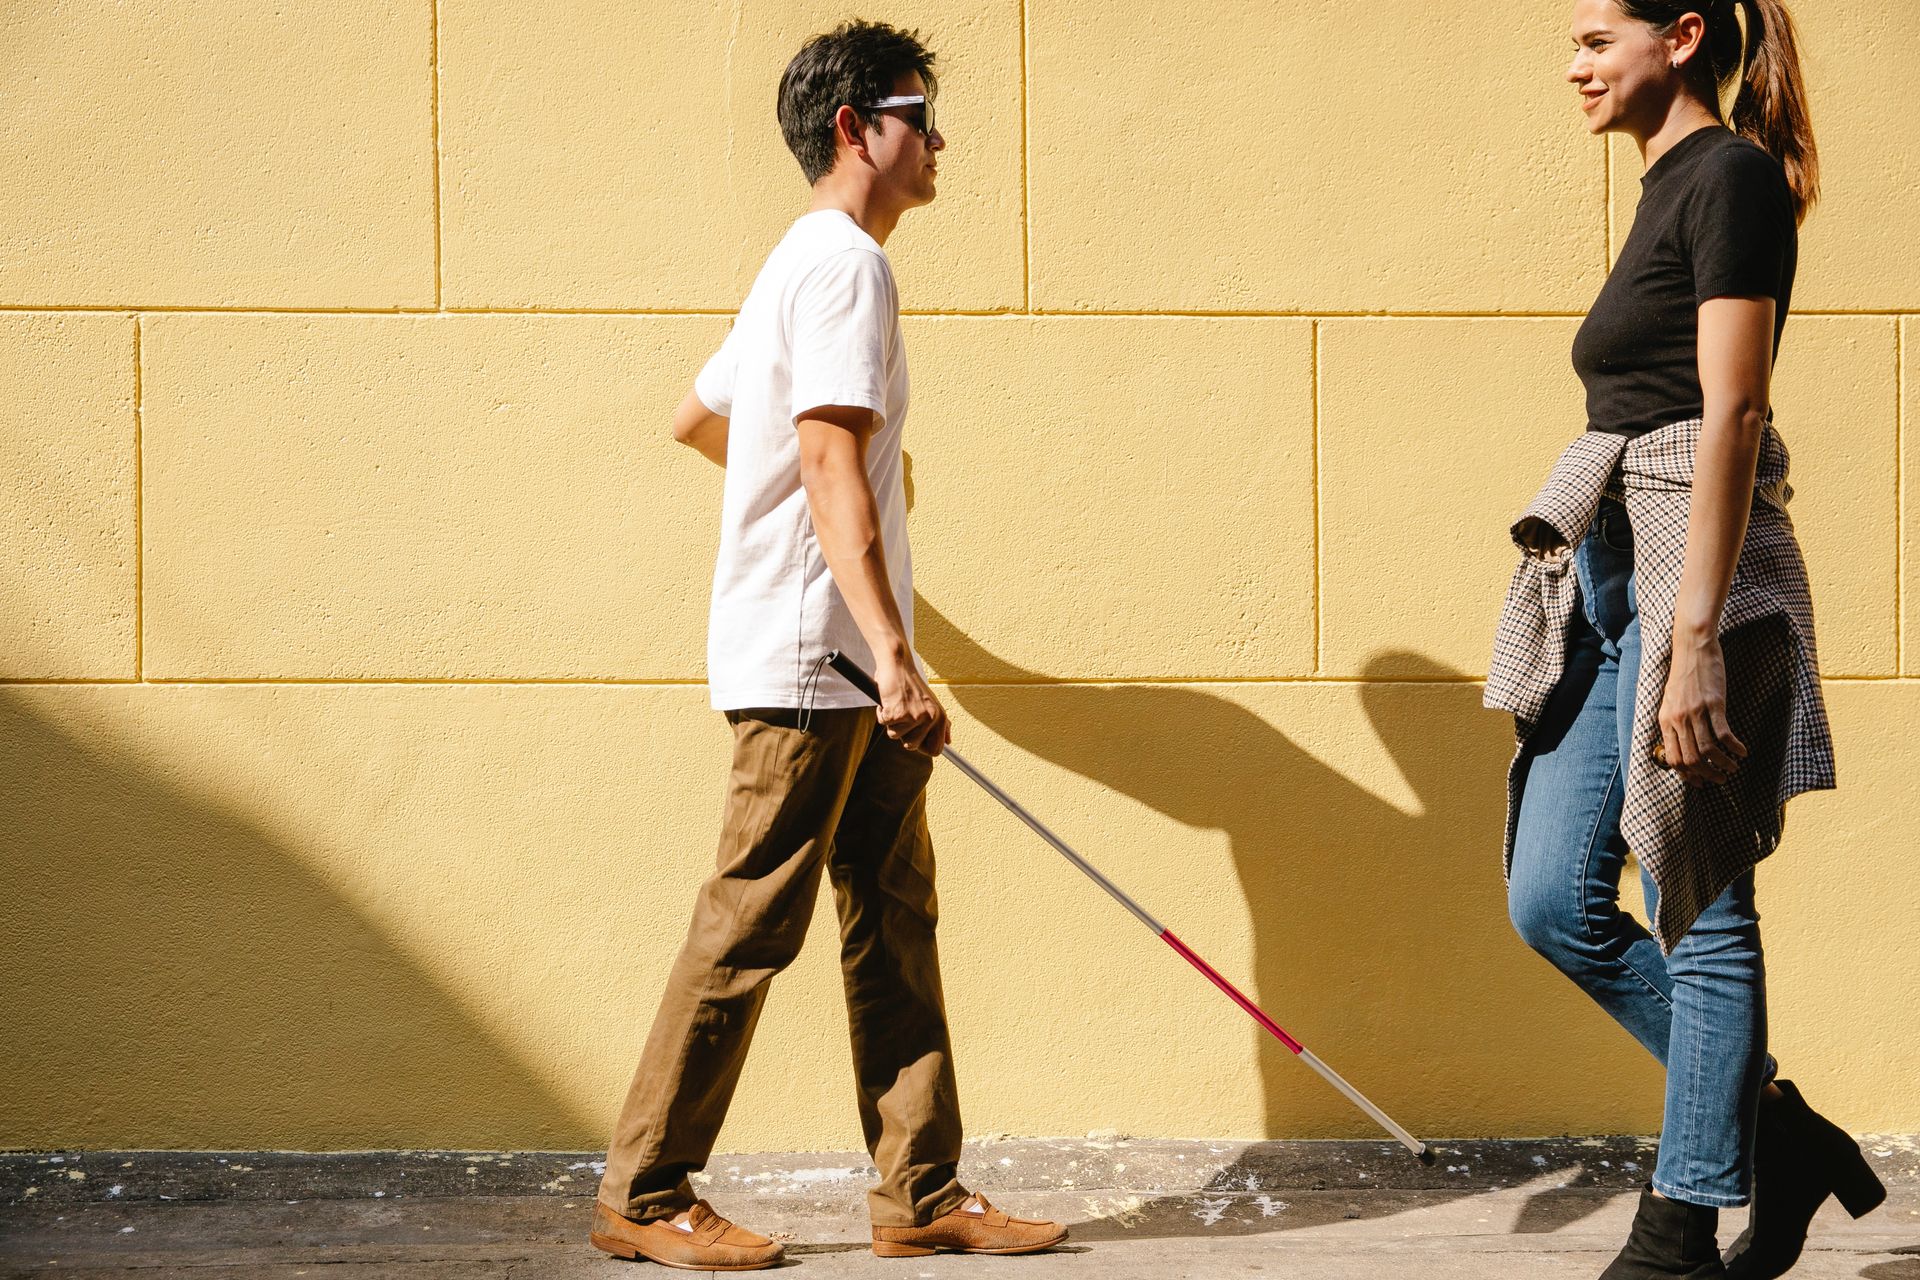 (Outdoor Adventures) A young man with sight loss walks across a street, using his white cane to guide him.